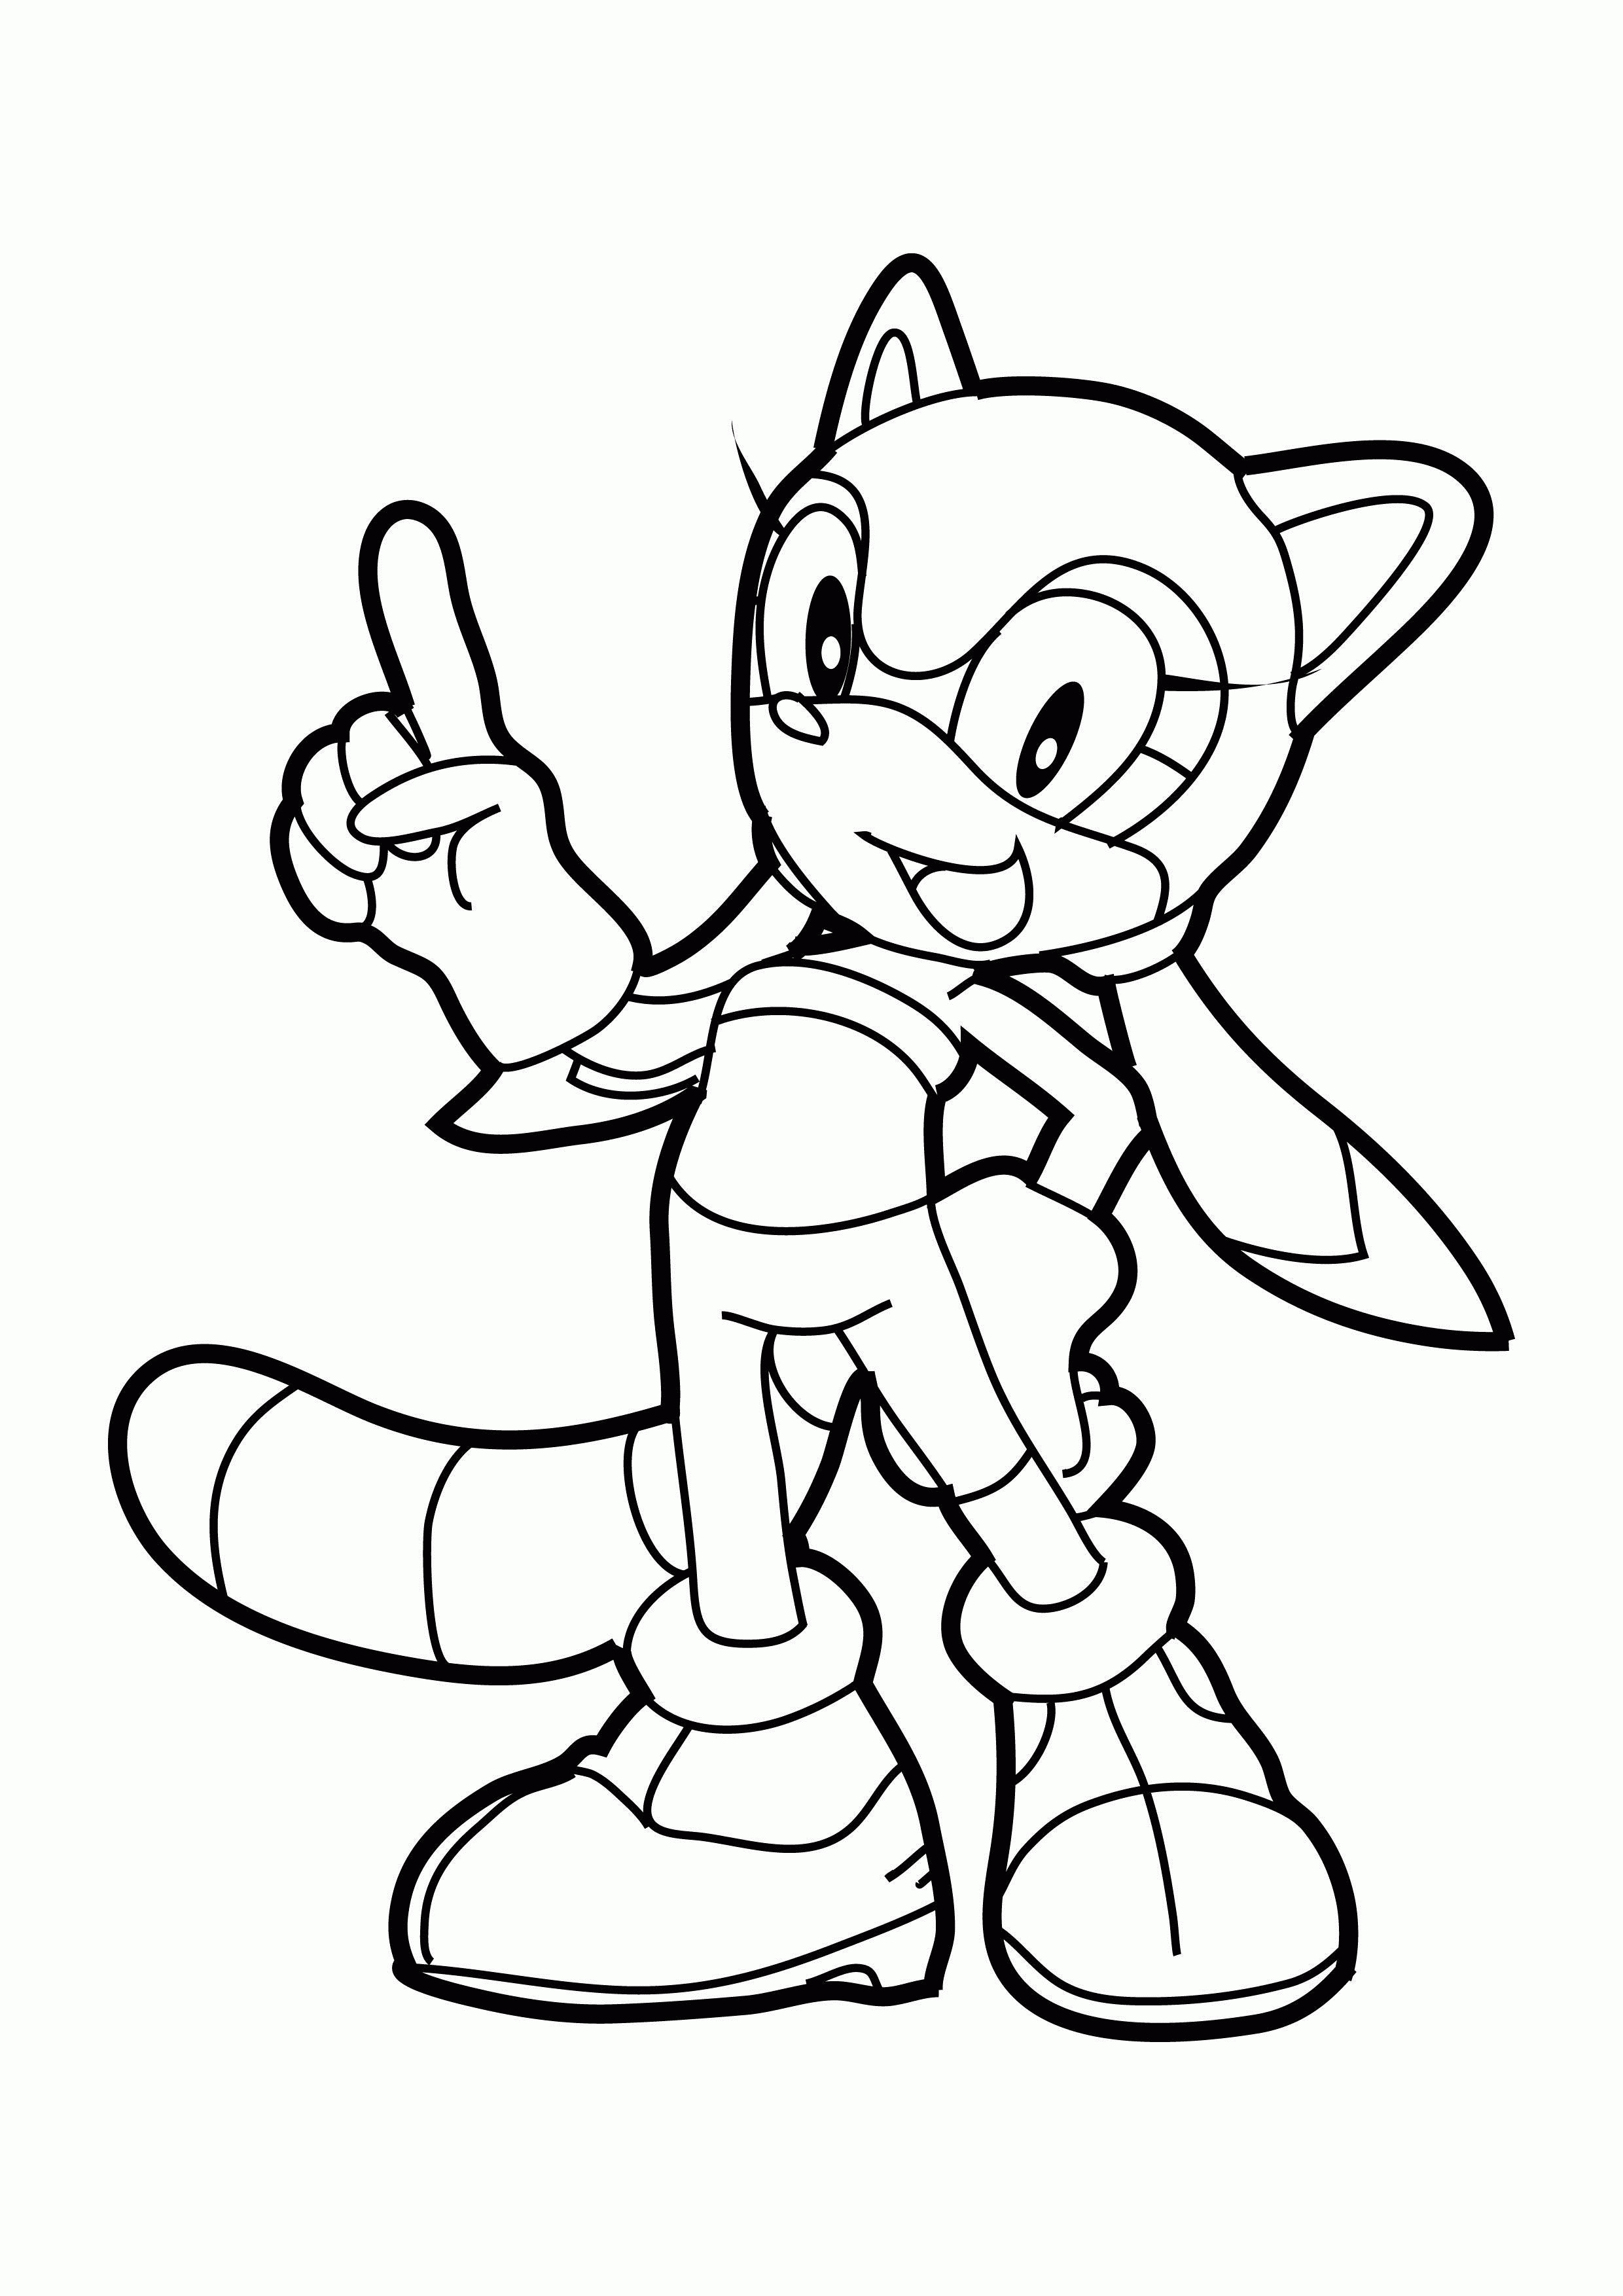 free-sonic-coloring-pages-knuckles-download-free-sonic-coloring-pages-knuckles-png-images-free